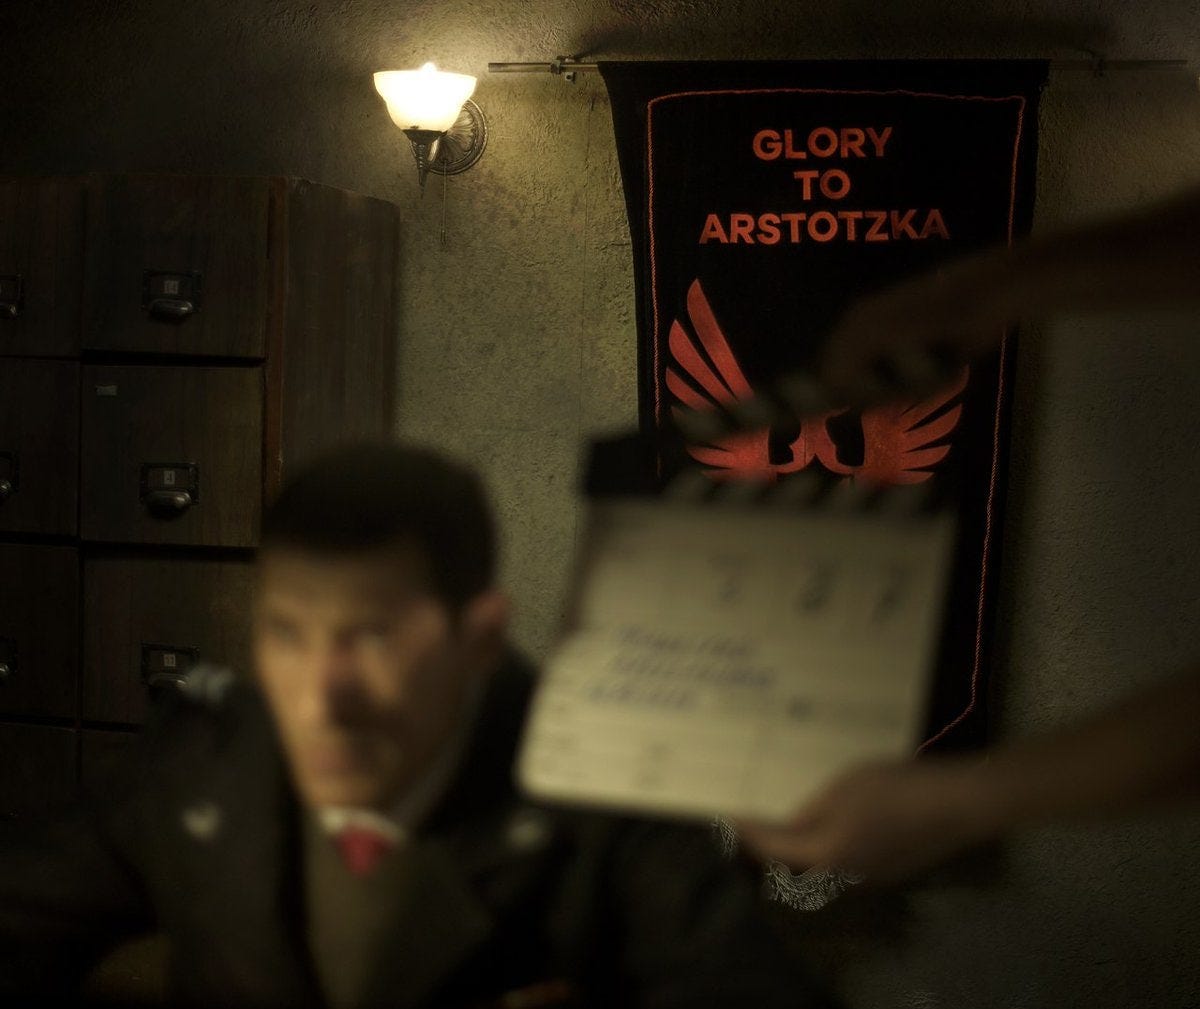 Papers, Please: Glory to Arstotzka!